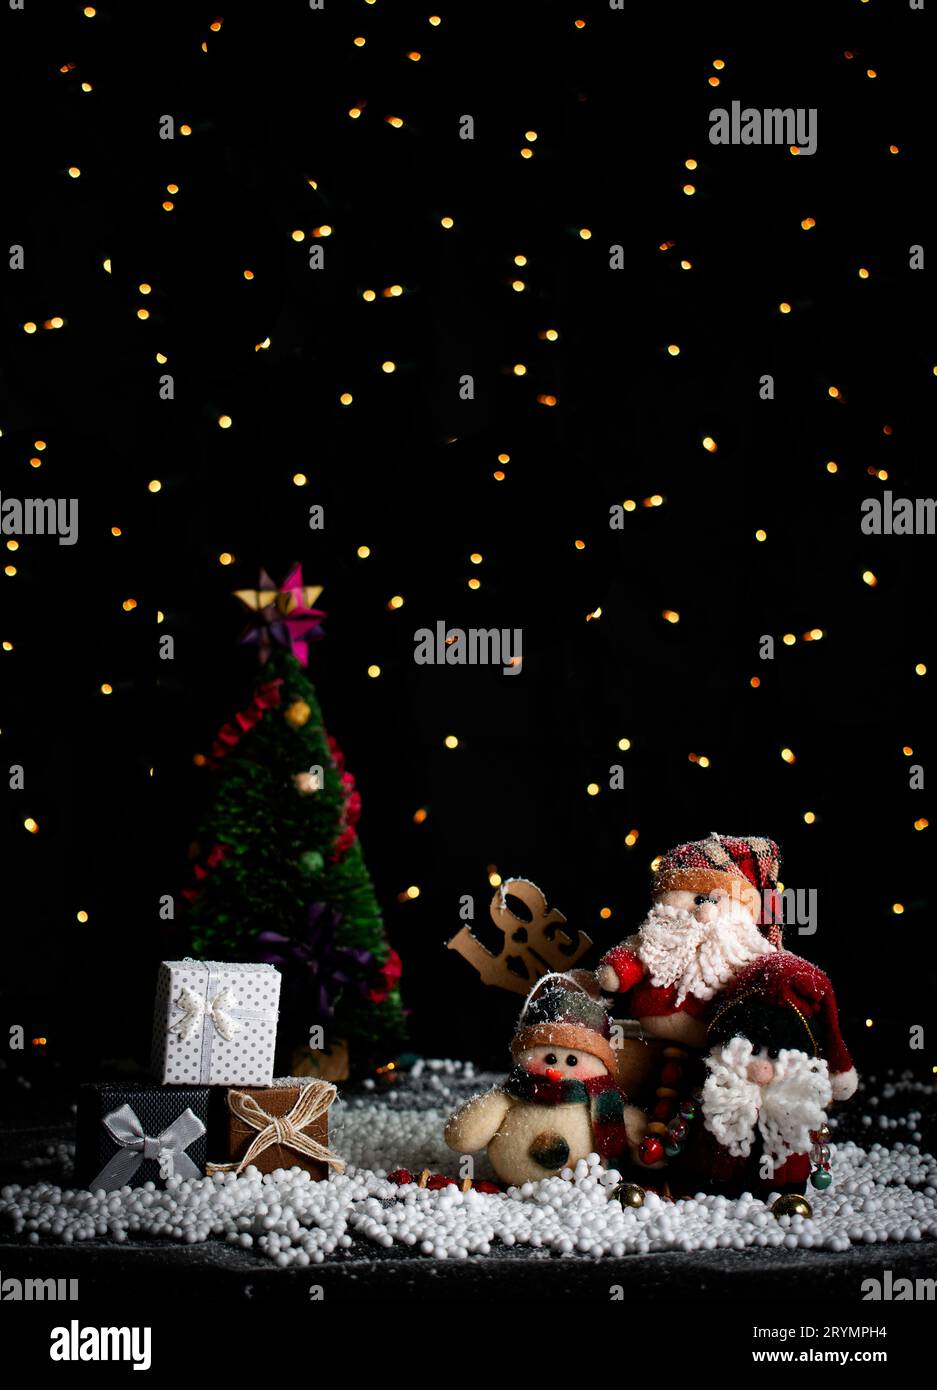 Christmas card featuring 3 plush Santas, 3 gift boxes, and in the background, a Christmas tree, all set against a black backdrop with blurred Christma Stock Photo